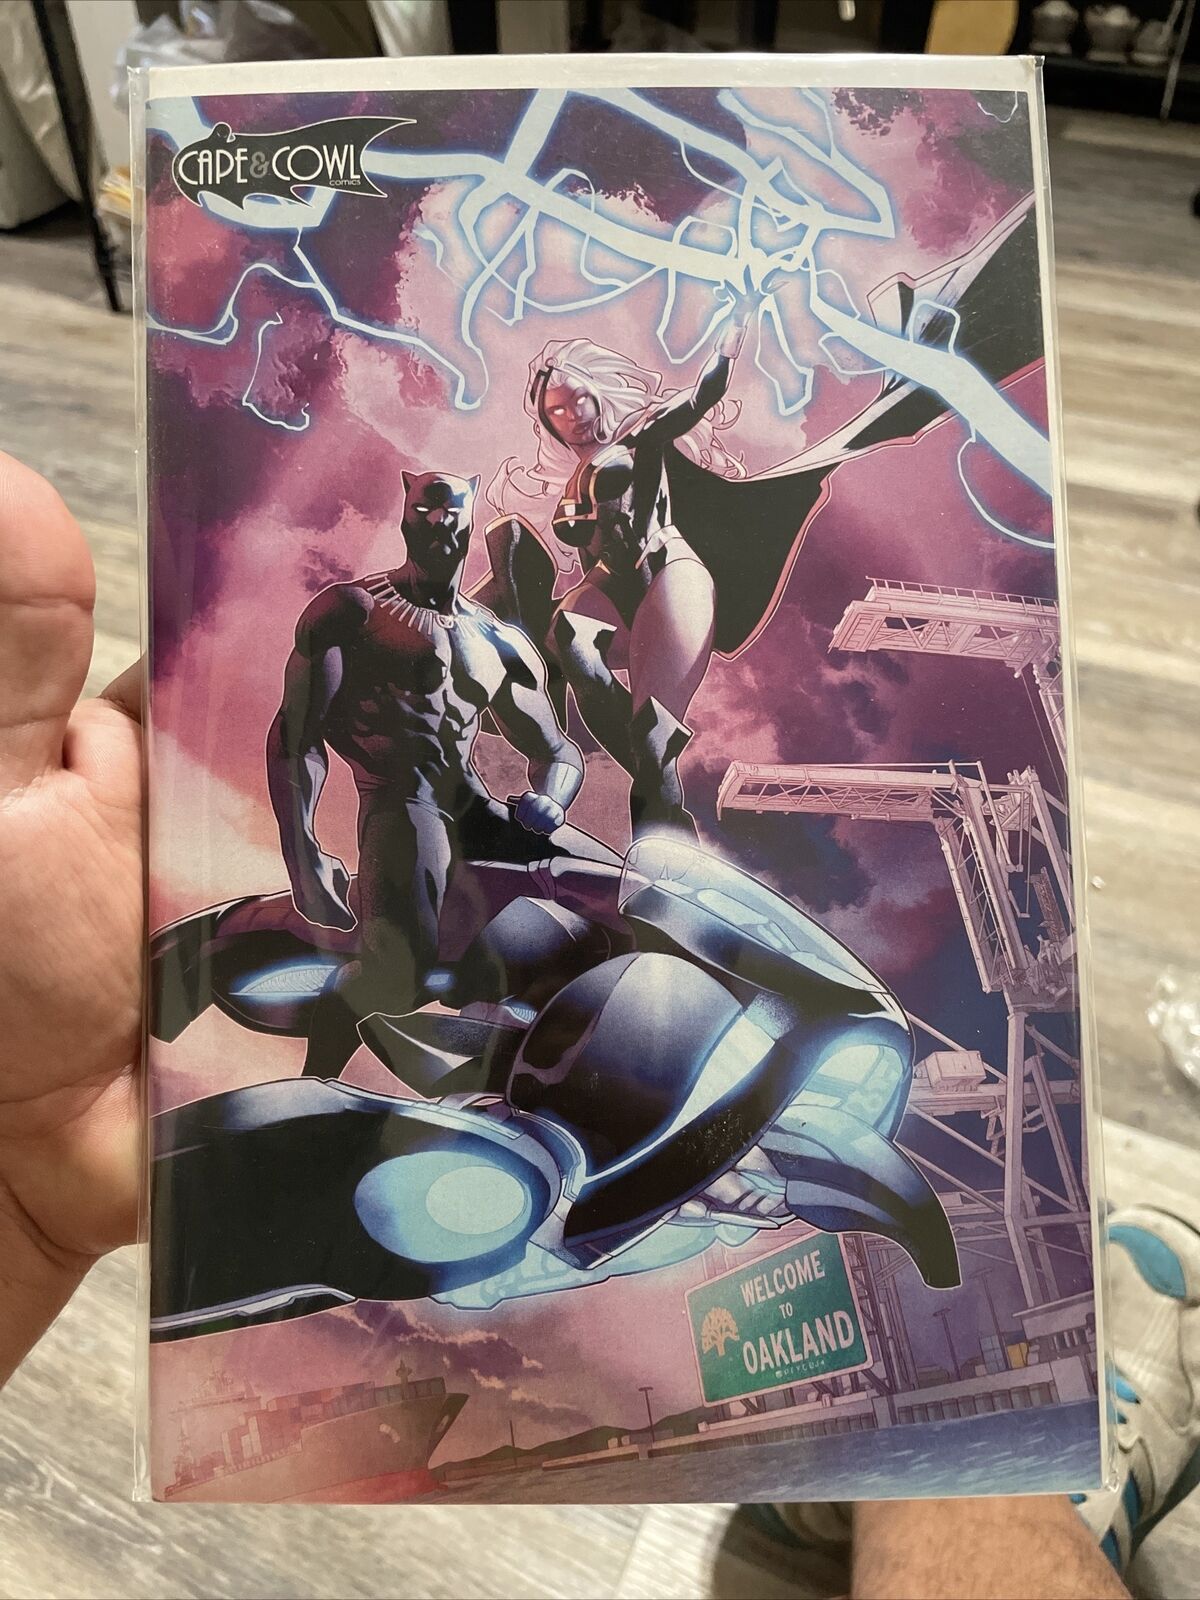 BLACK PANTHER 1 CAPE AND COWL EDITION OAKLAND VARIANT